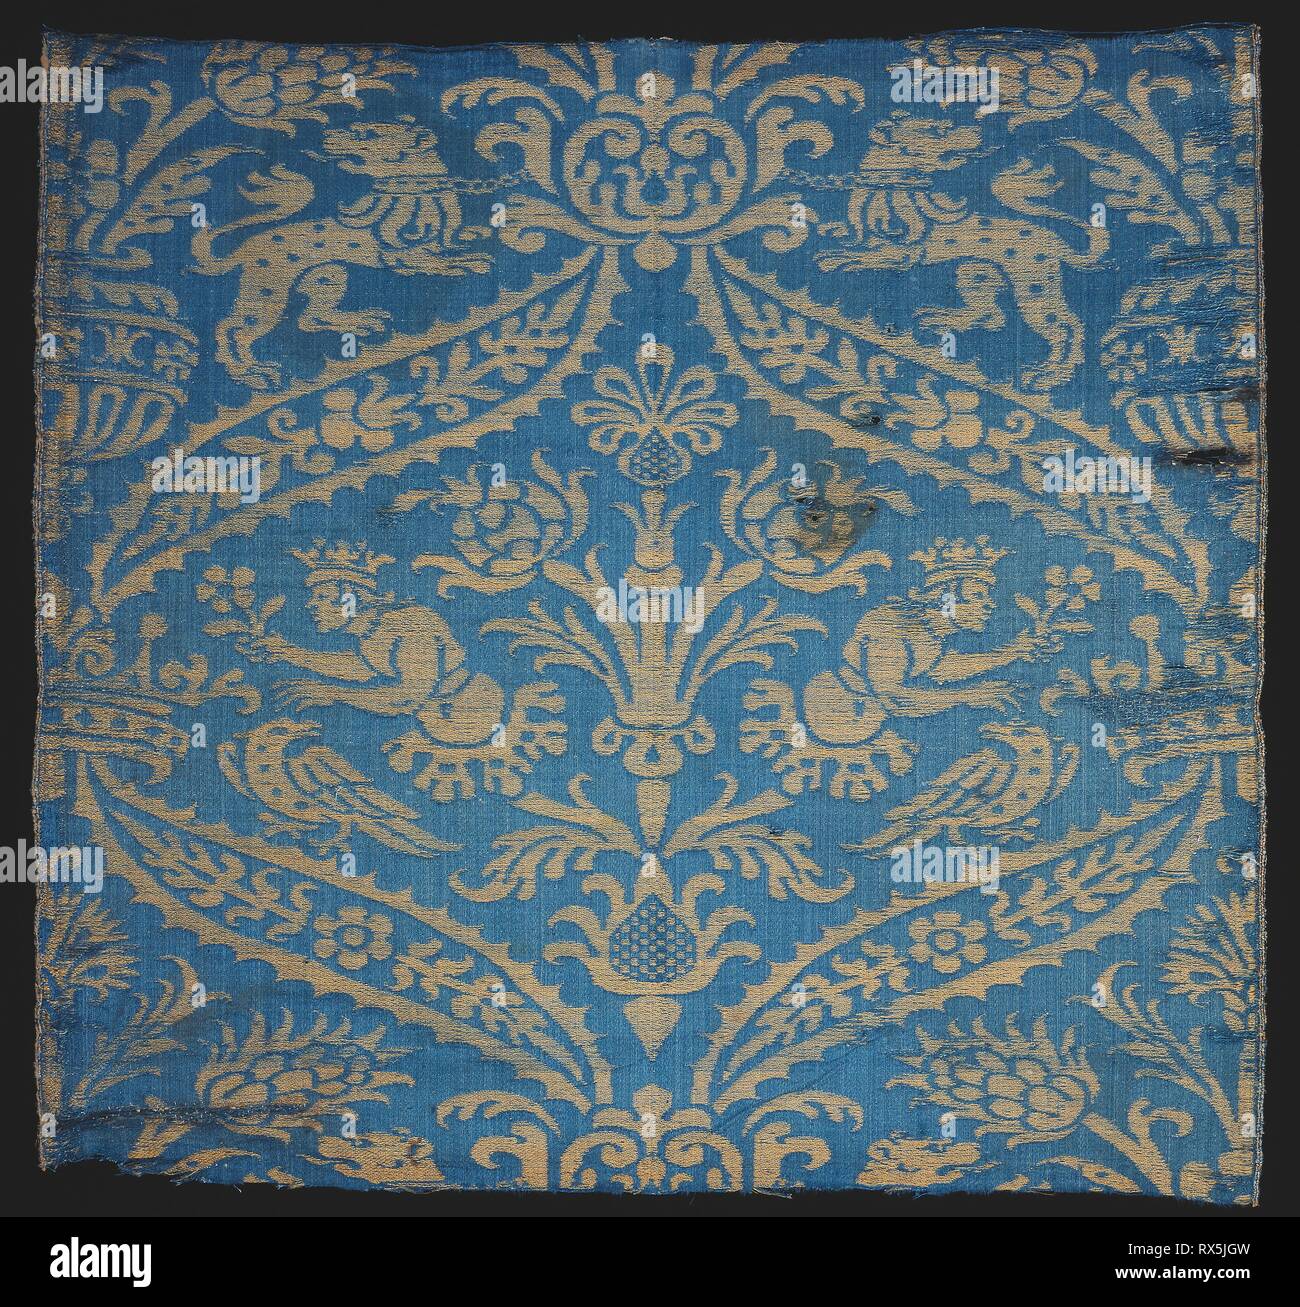 Panel. Italy. Date: 1575-1600. Dimensions: 52.2 x 55.5 cm (20 1/2 x 21 7/8 in.)  Warp repeat: 45.8 cm (18 in.). Silk, satin damask weave with warp-float faced 2:1 'Z' twill interlacings of secondary binding warps and supplementary patterning wefts. Origin: Italy. Museum: The Chicago Art Institute. Stock Photo